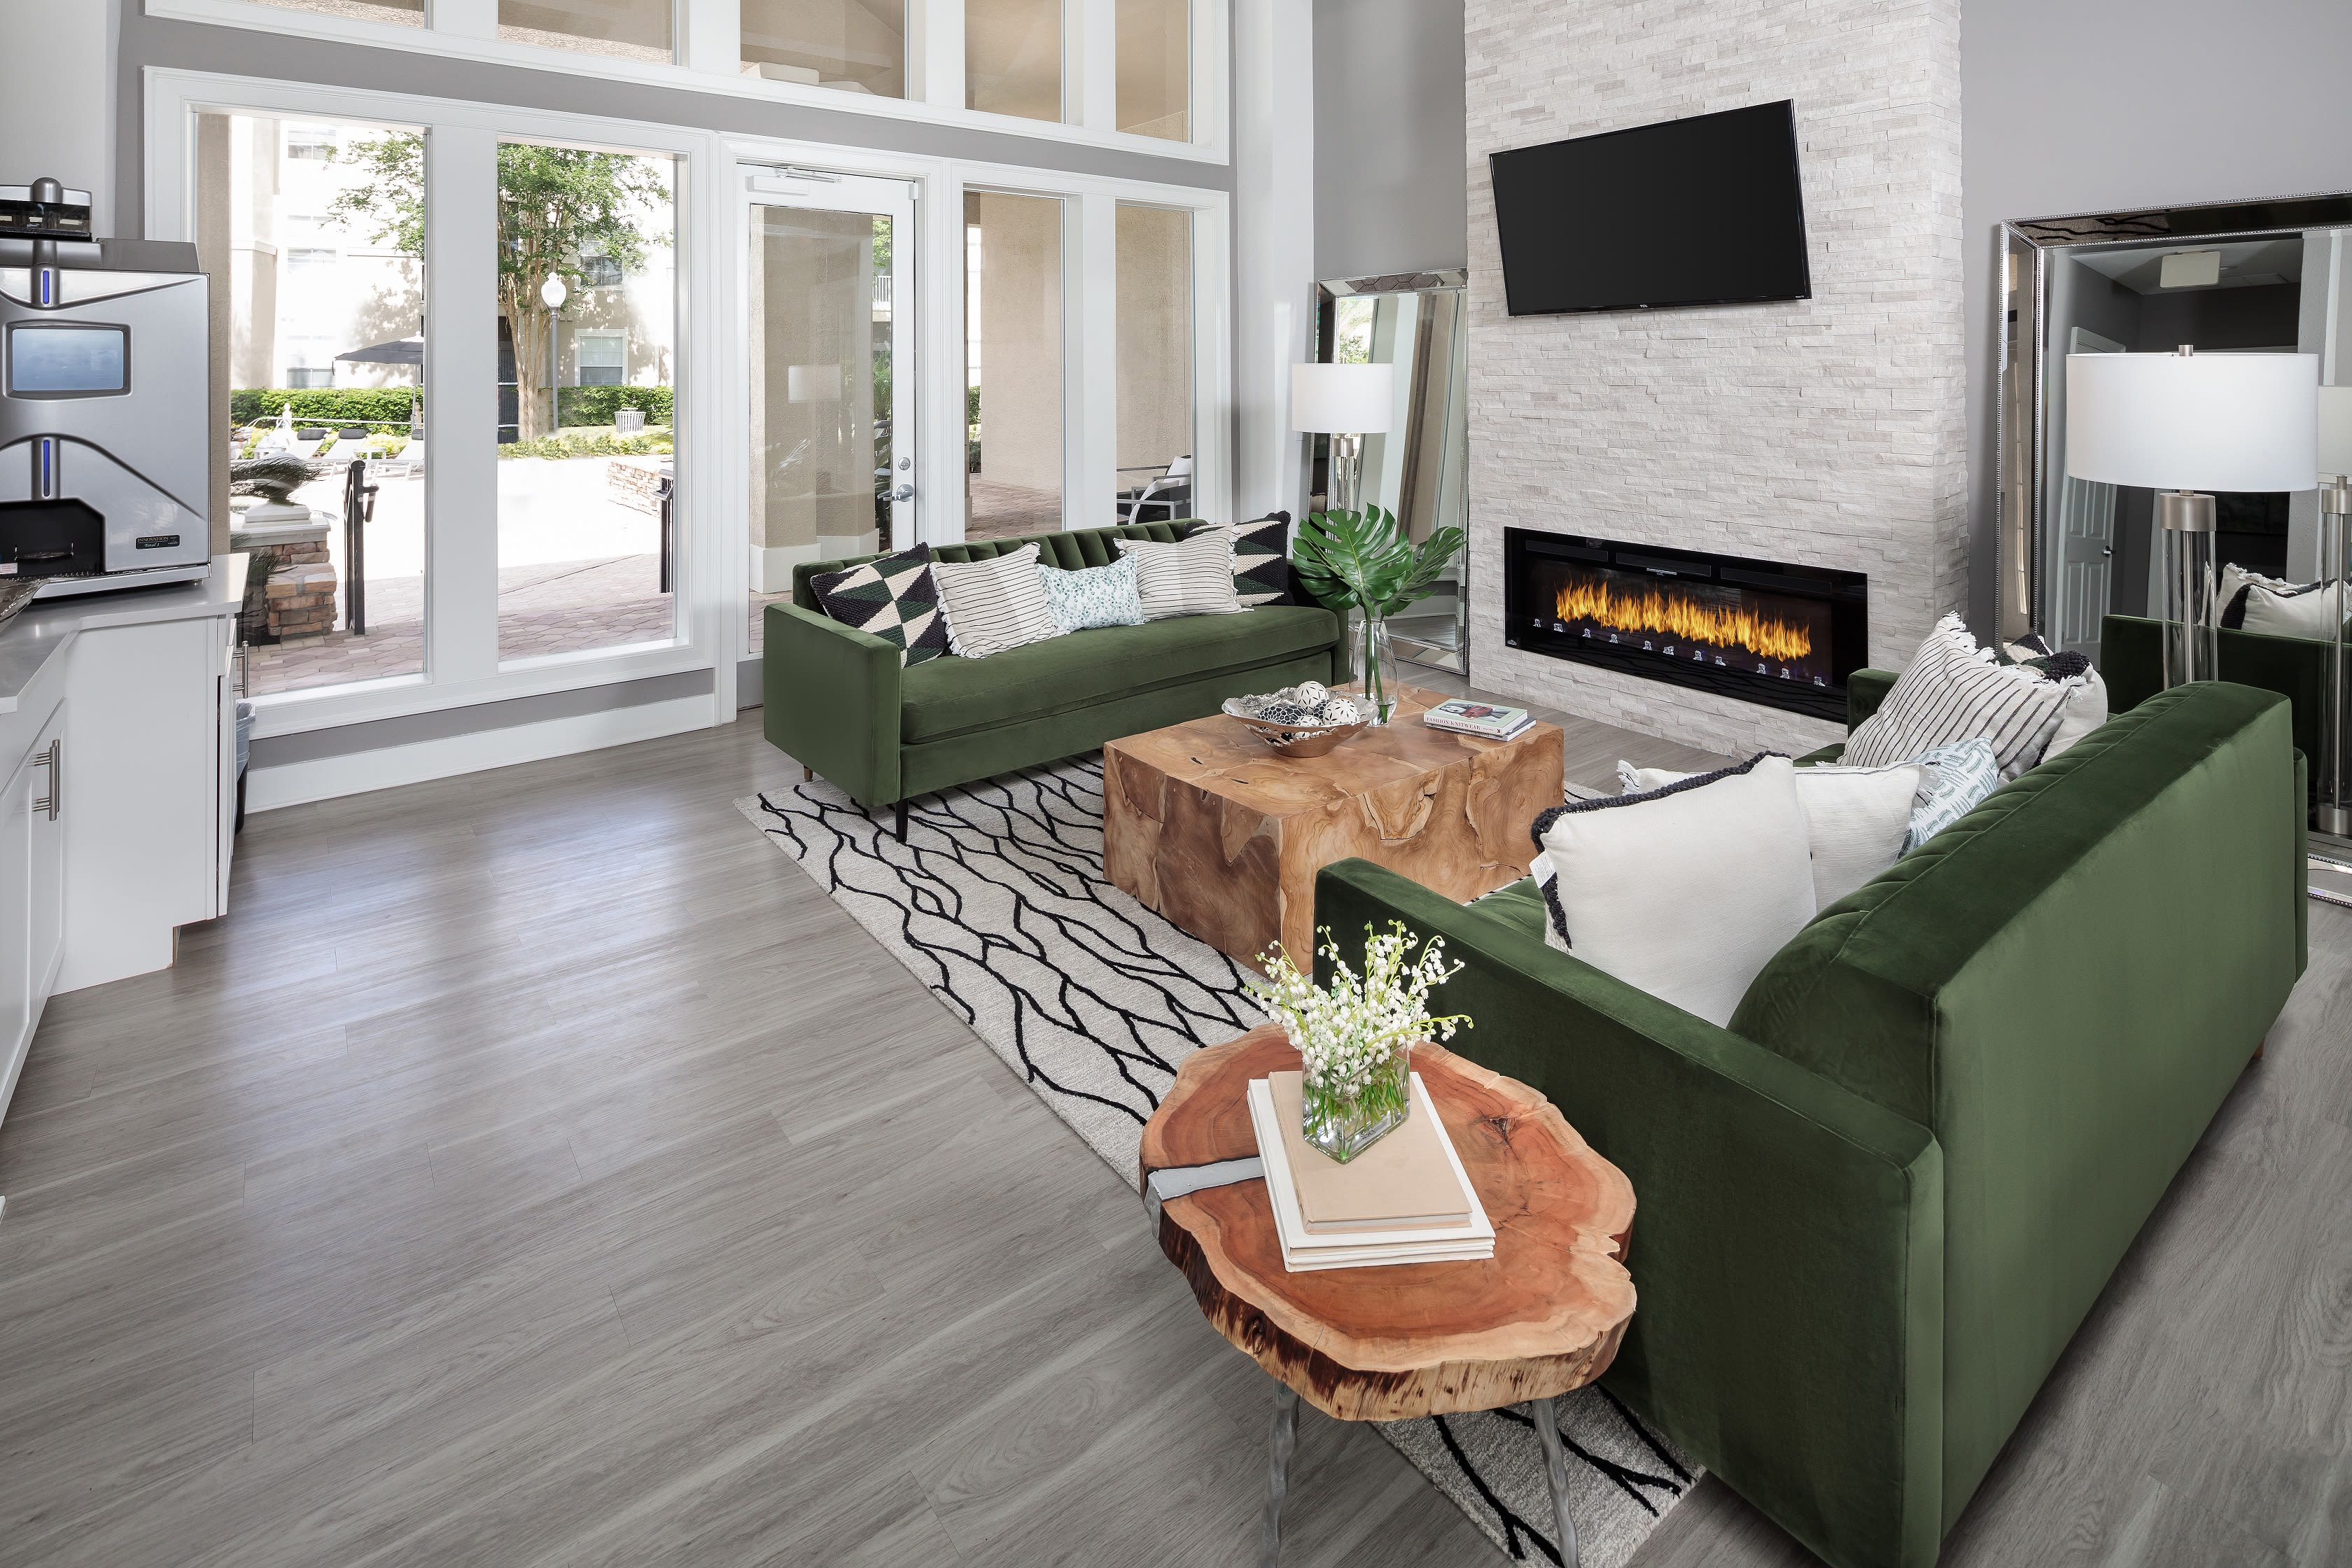 Well-decorated open-concept living space in a model home at Eddison at Deerwood Park in Jacksonville, Florida